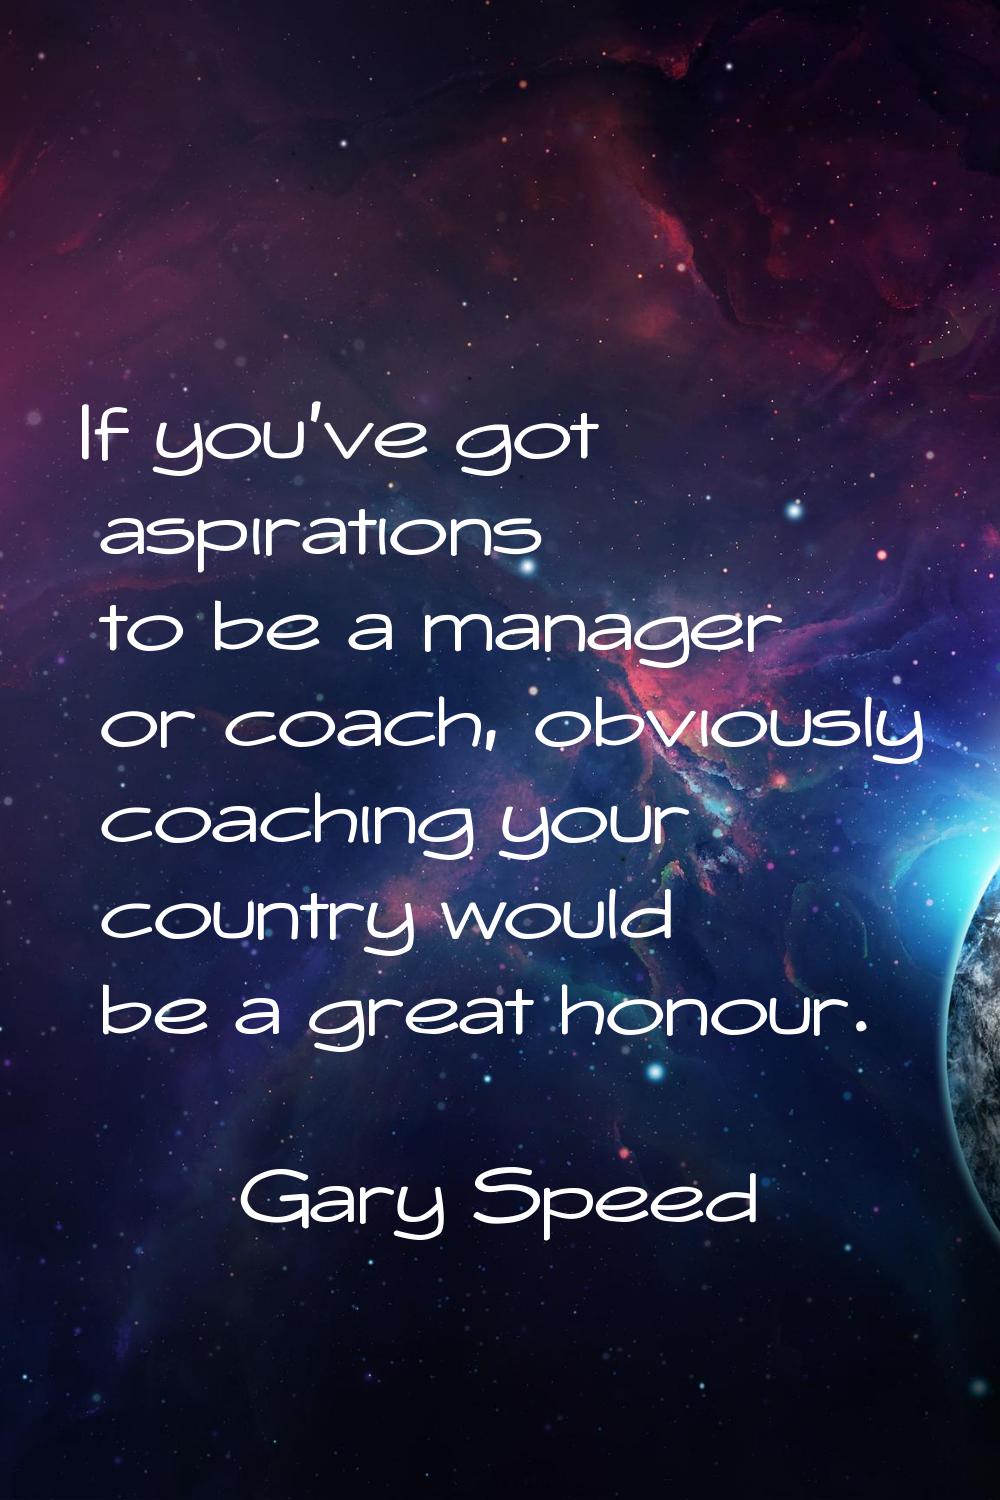 If you've got aspirations to be a manager or coach, obviously coaching your country would be a grea